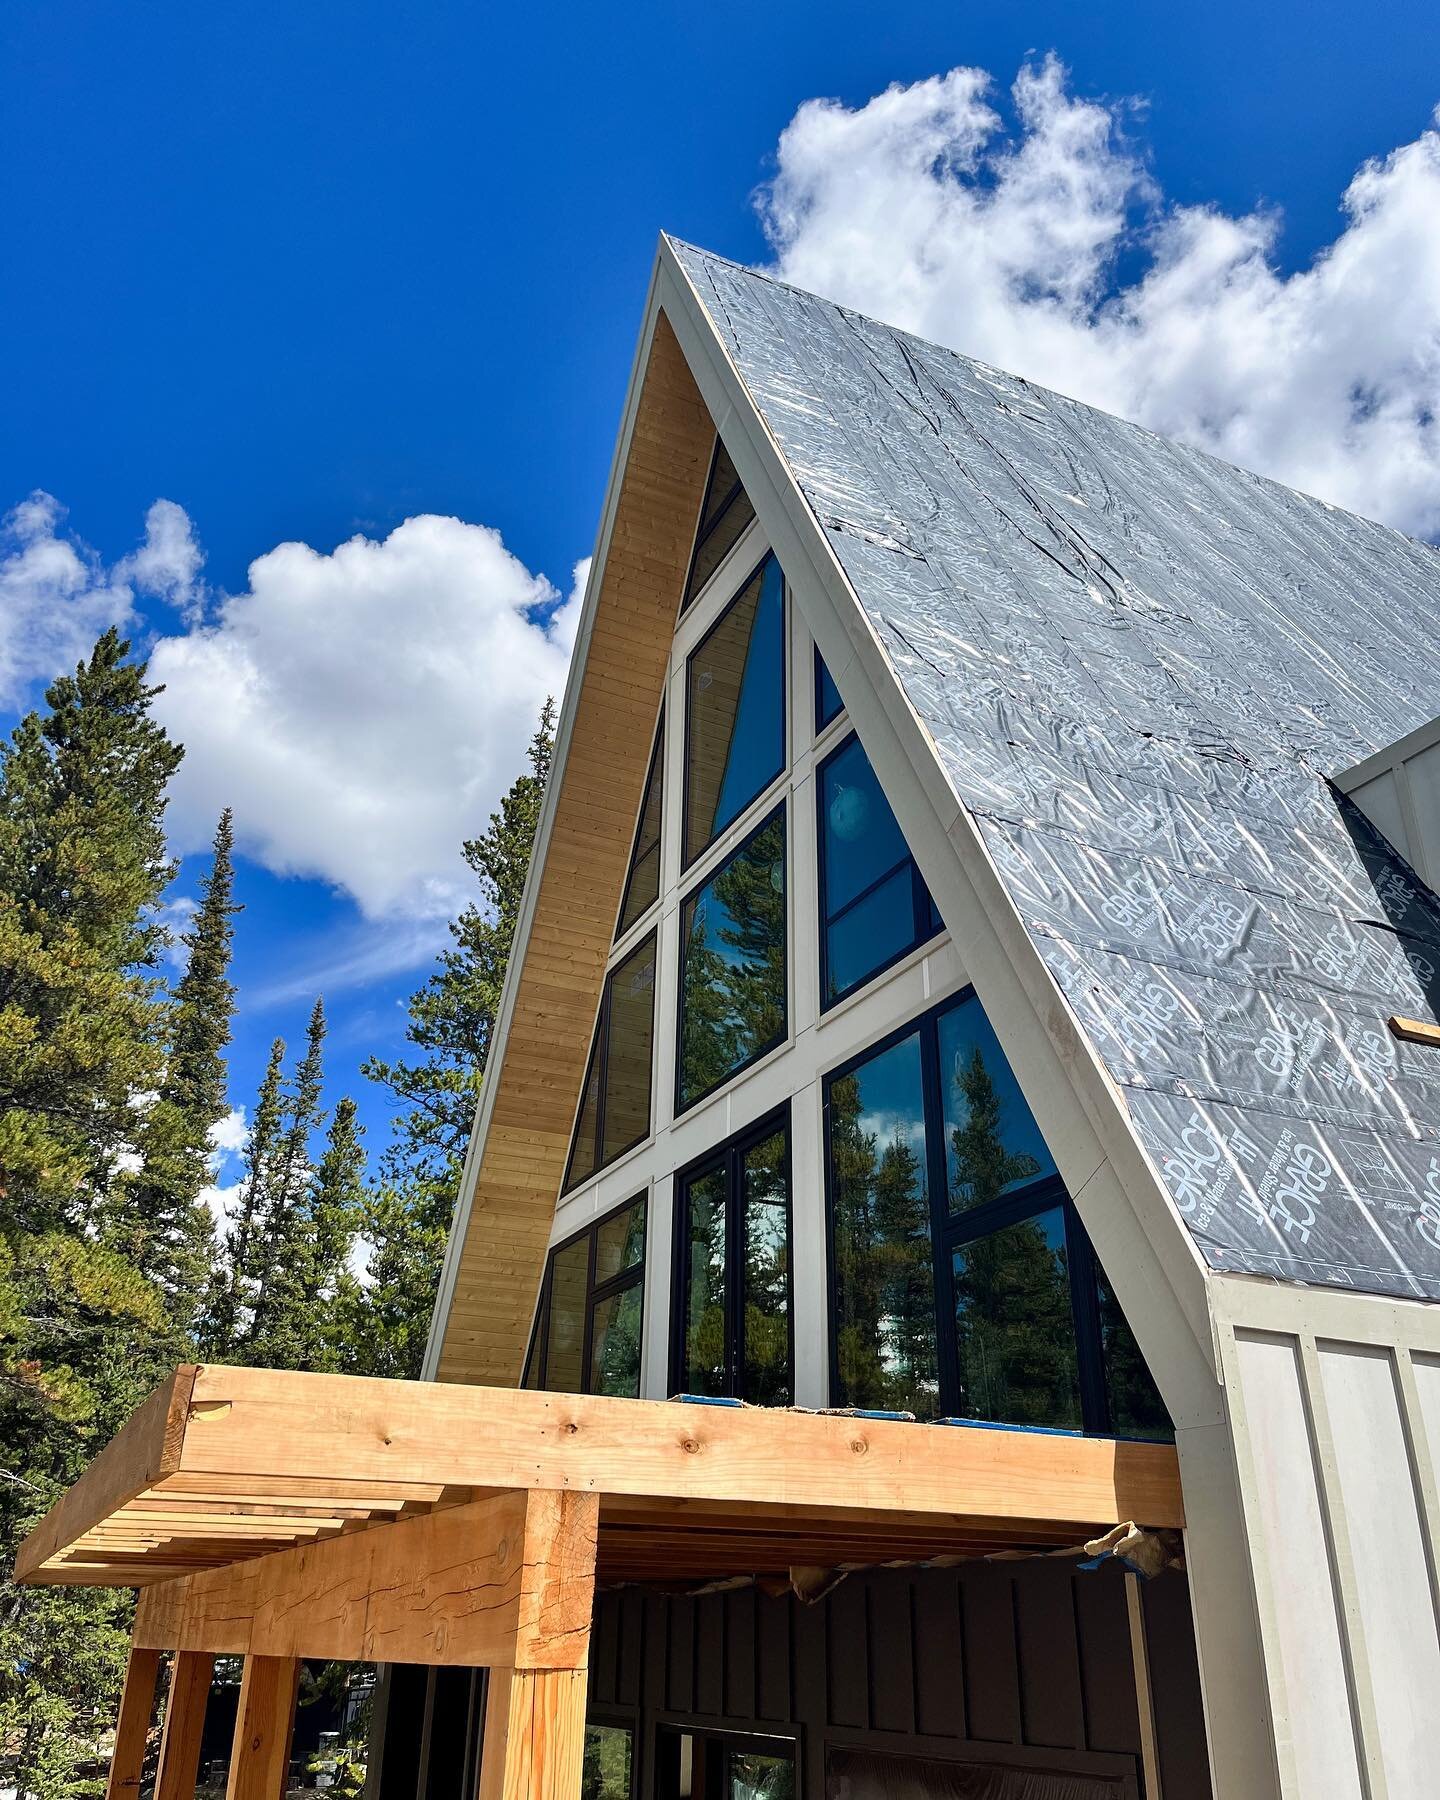 A couple weeks ago Daly visited Dave &amp; Shanna McCann at their A-frame-in-progress in Colorado to finally meet face to face, chat with their contractor, and tour the house! Set against a truly breathtaking backdrop of mountains, pines, and the big